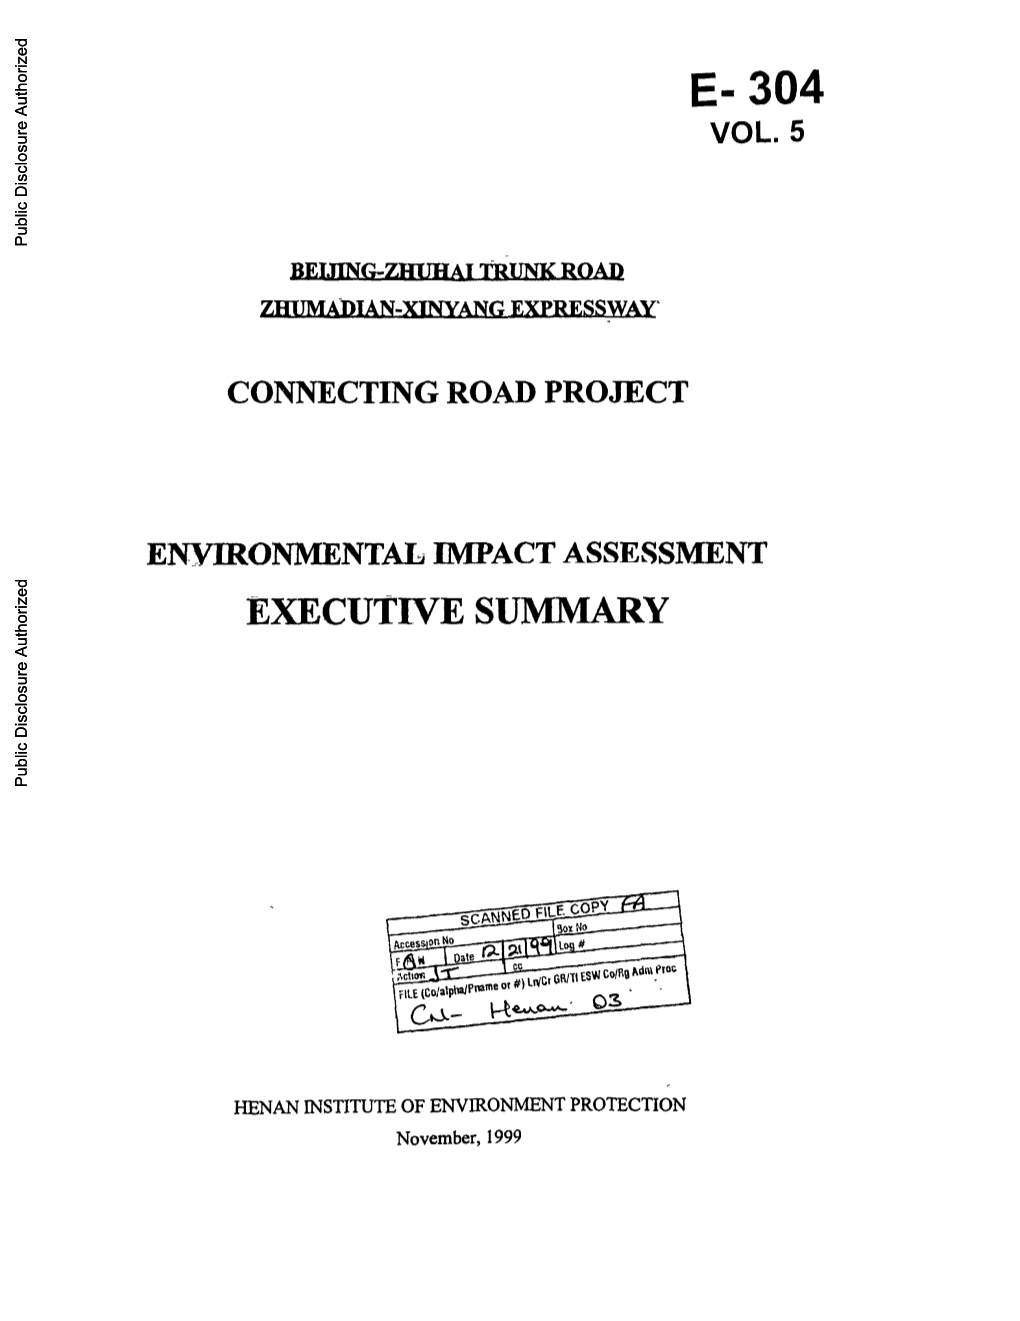 Connecting Road Project Environmental Impact Assessment